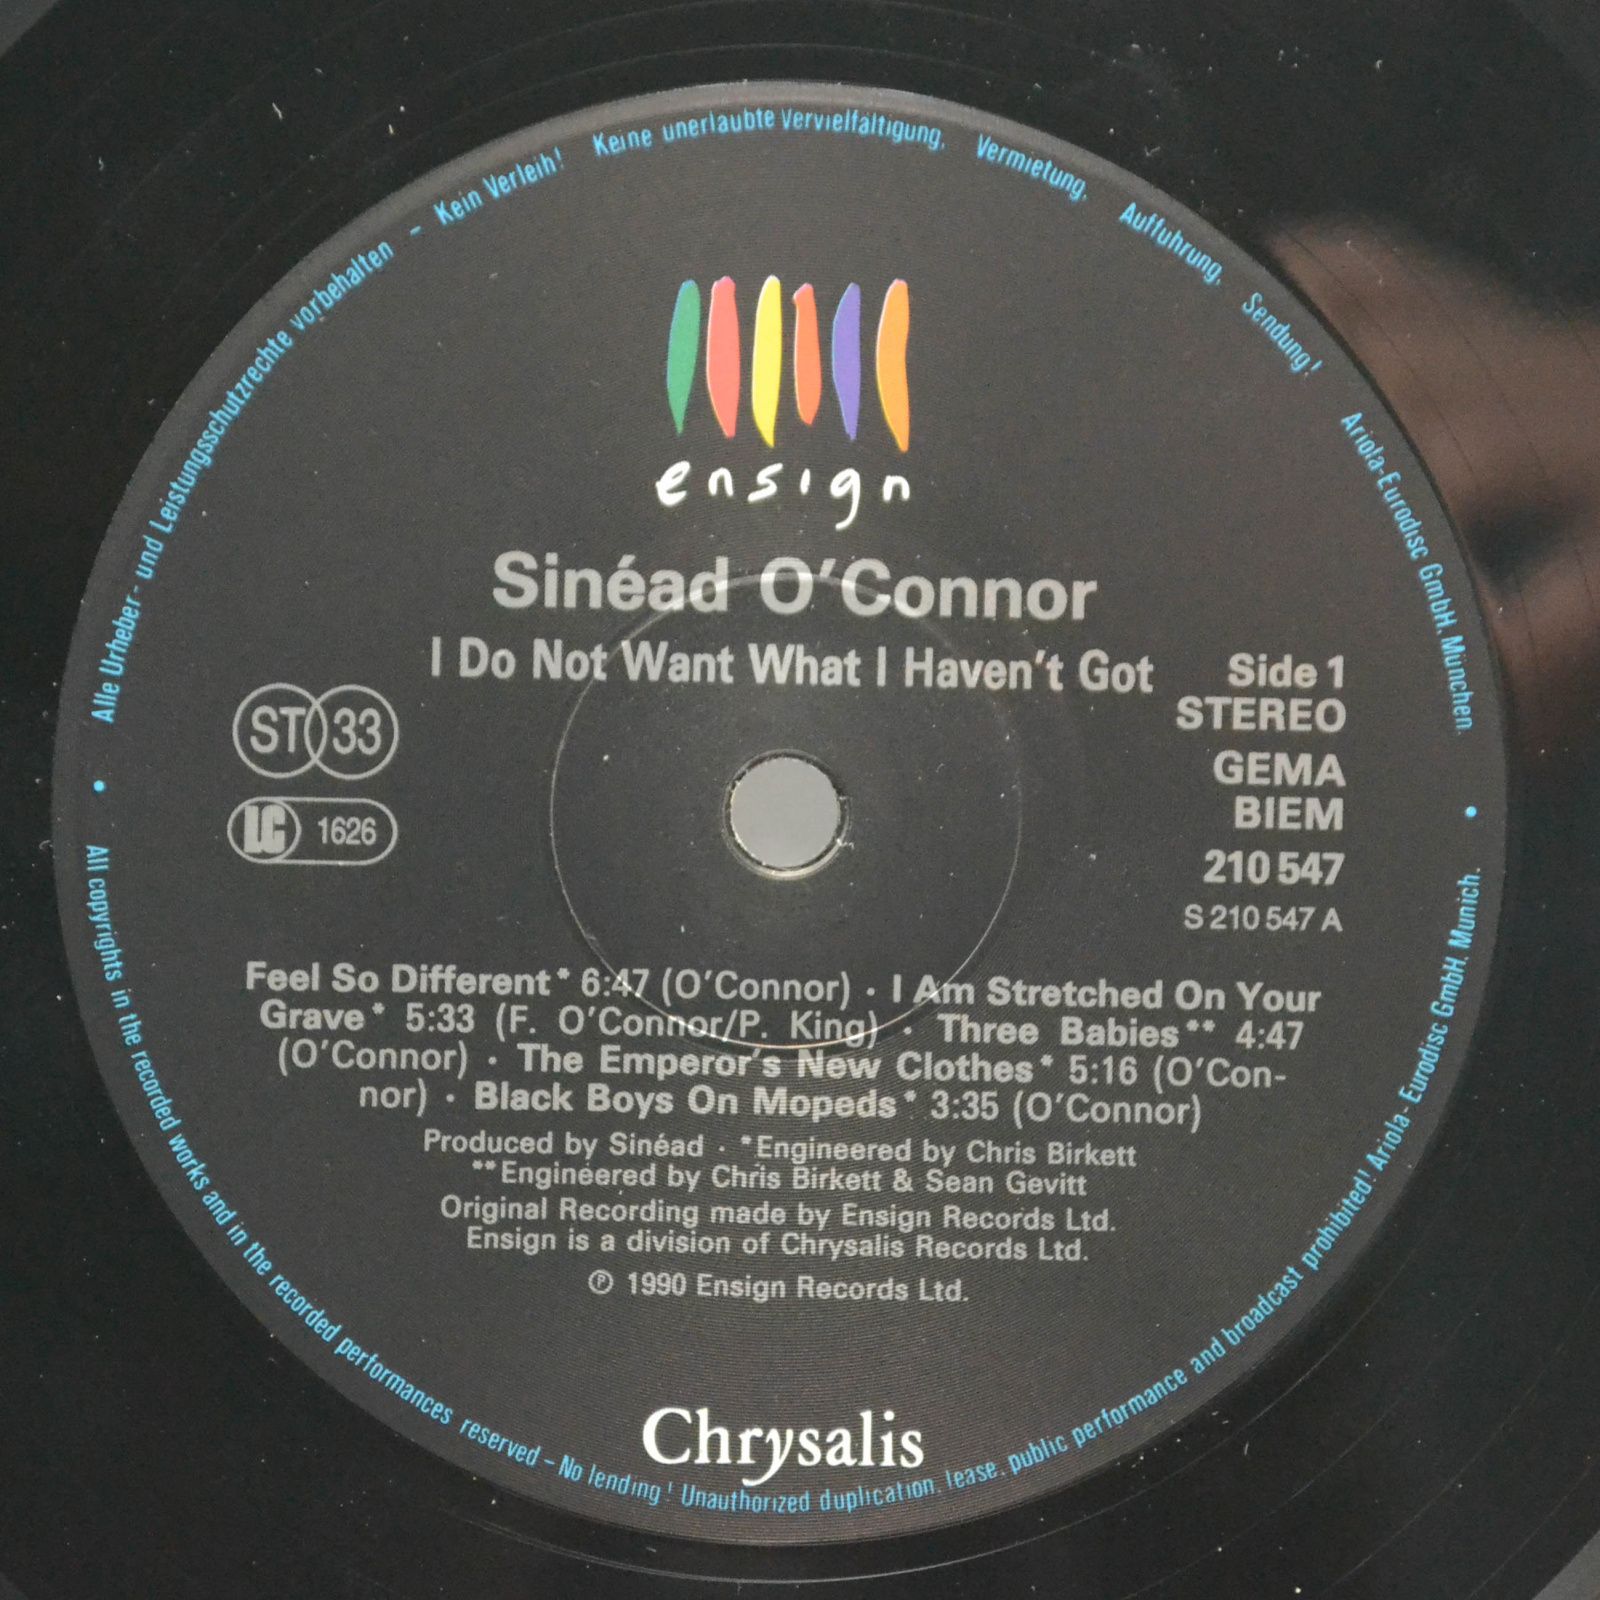 Sinéad O'Connor — I Do Not Want What I Haven't Got, 1990